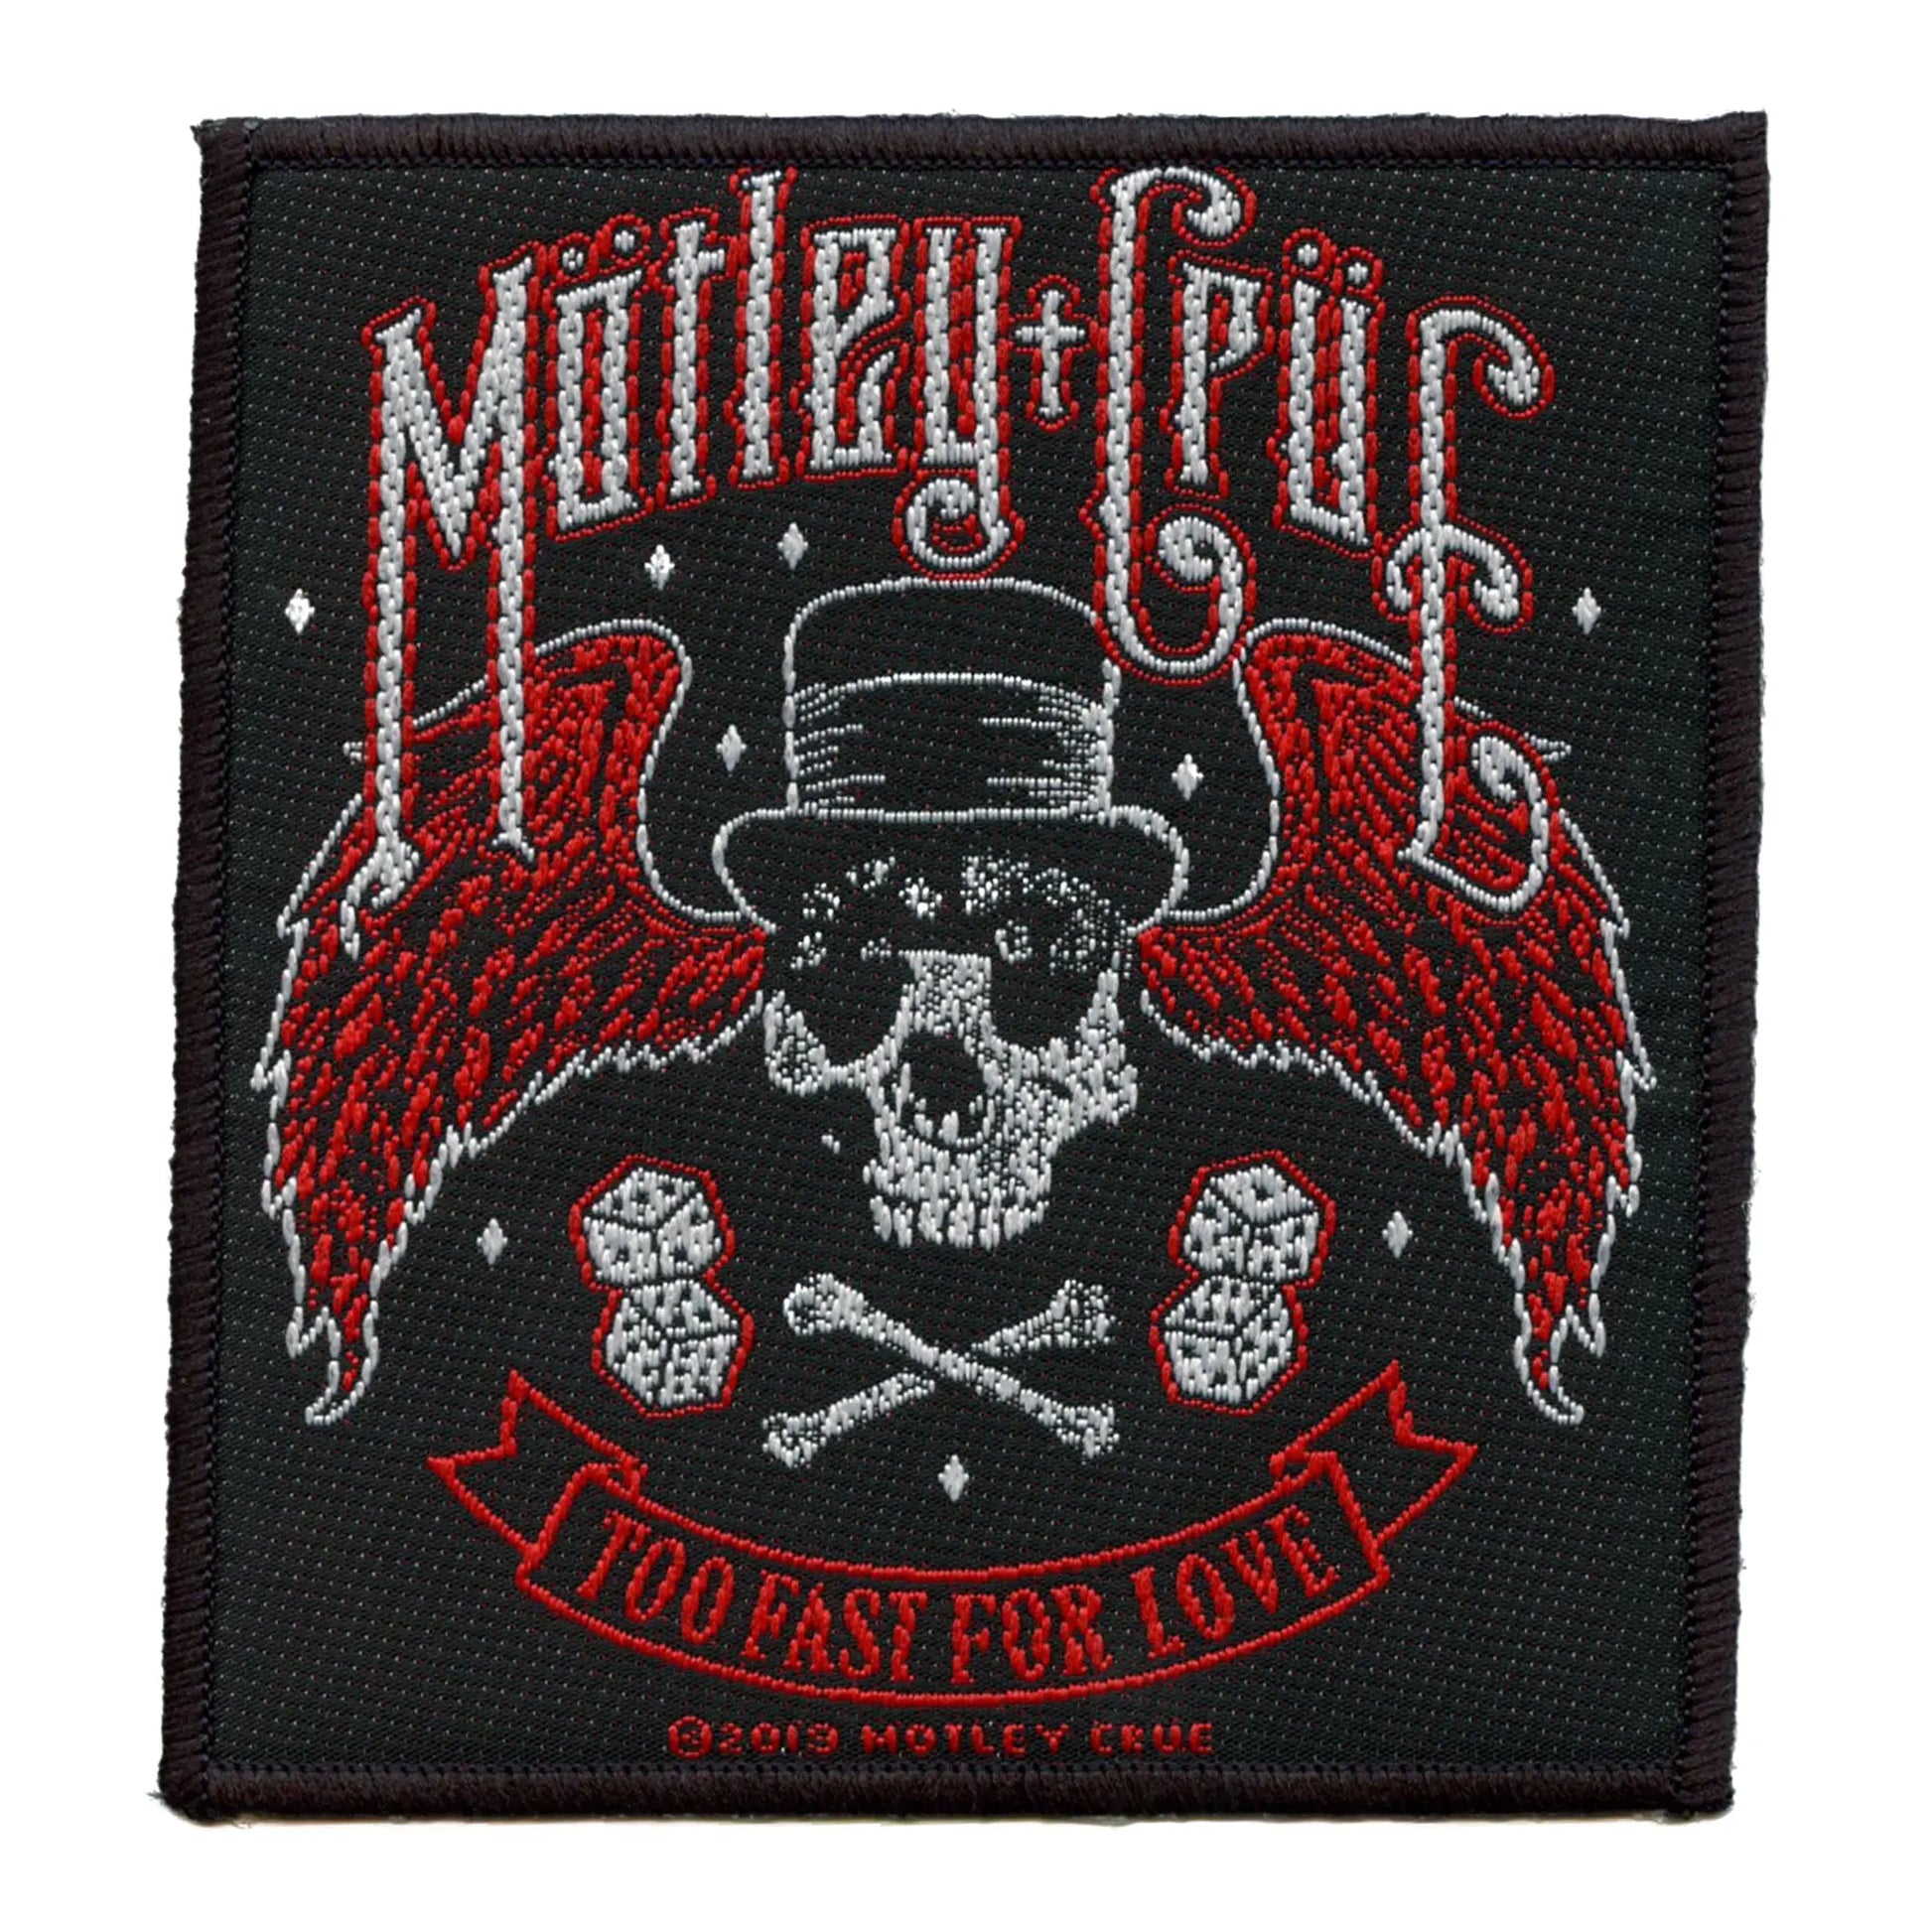 Motley Crue Too Fast For Love Patch Los Angeles California Woven Iron On